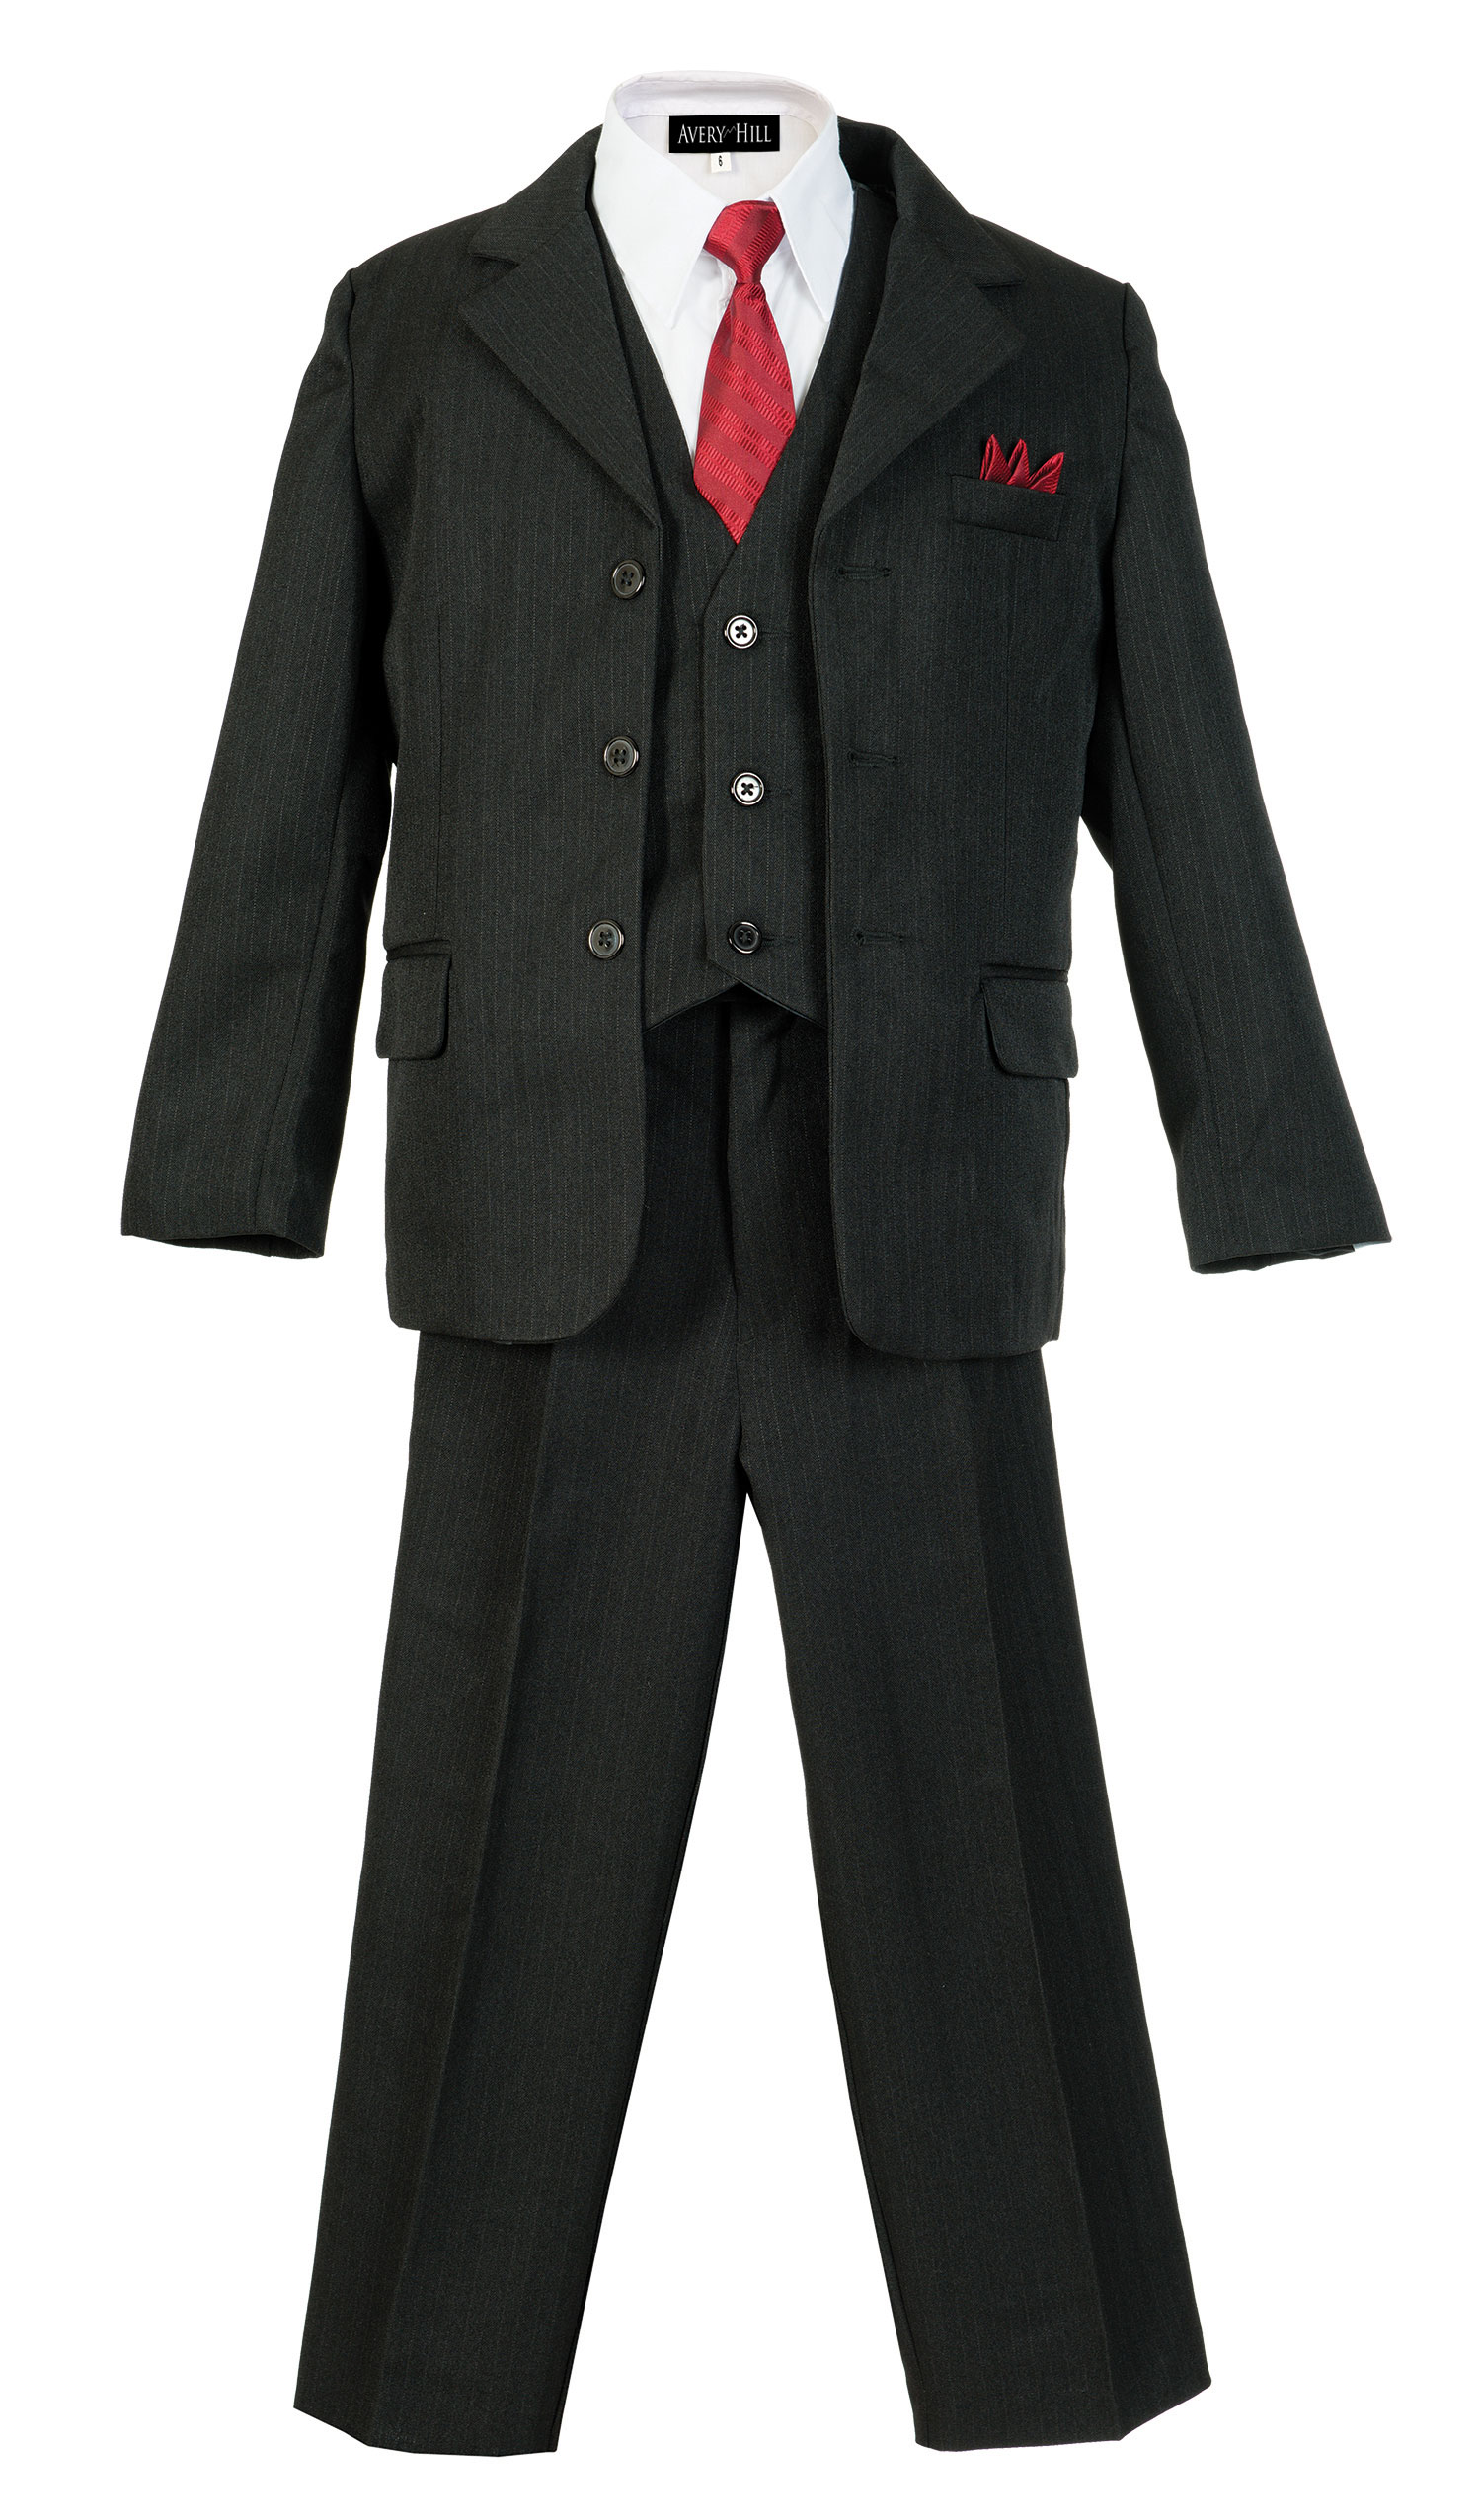 Boys Pinstripe Suit Set with Matching Tie BK 14